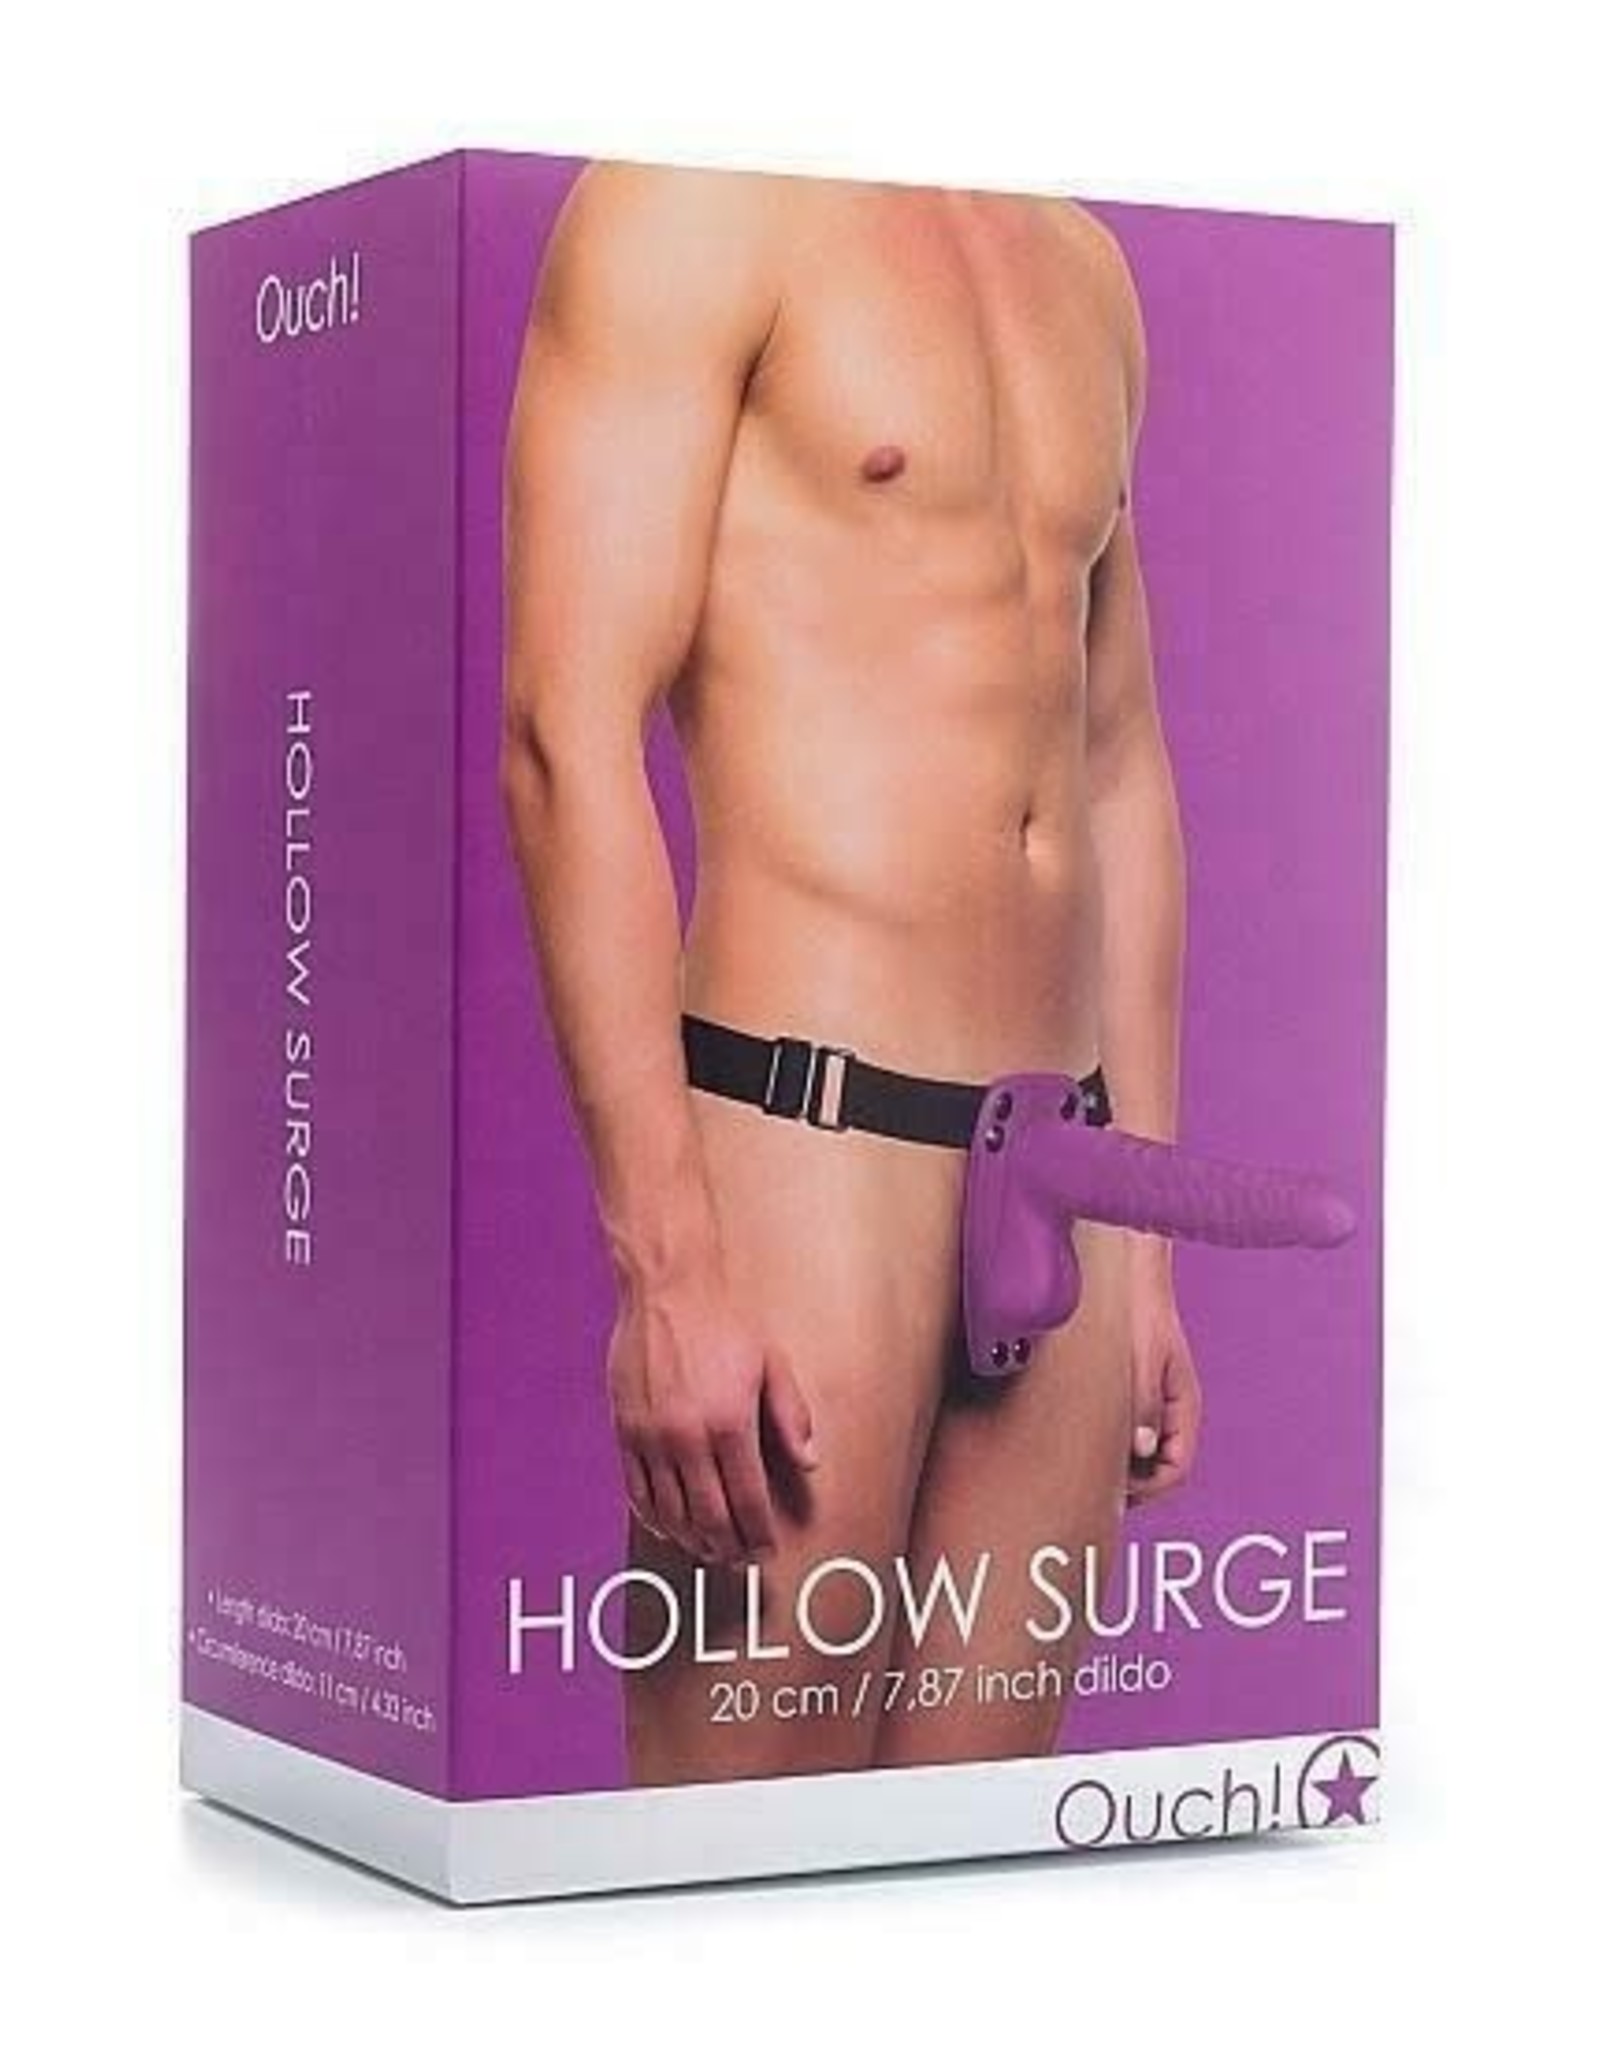 Ouch! - Hollow Surge Strap-On (purple)